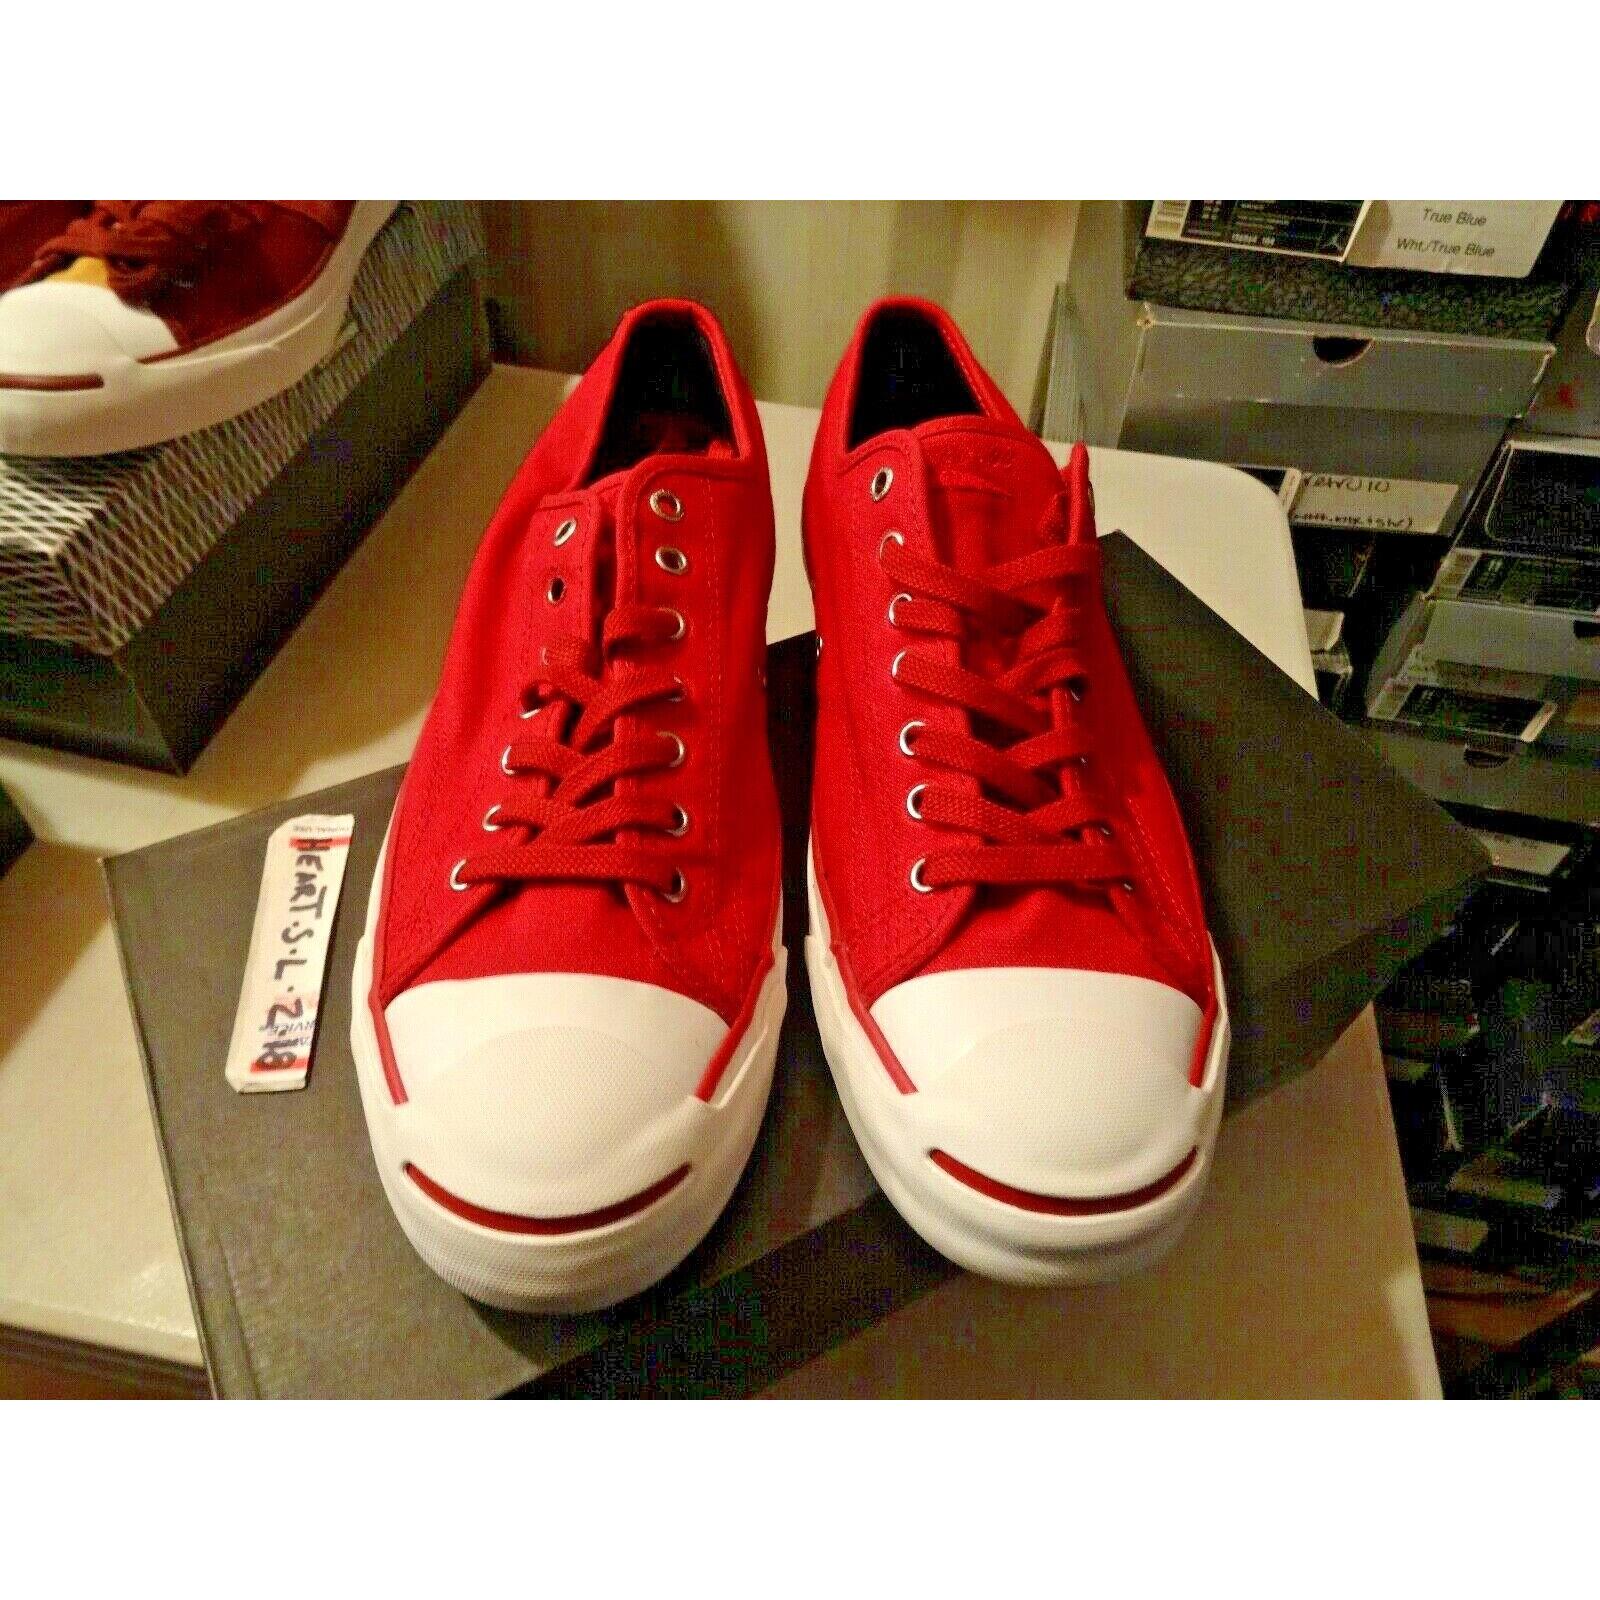 Converse X Undefeated Jack Purcell Red Undftd 128667C SZ 13 Huf